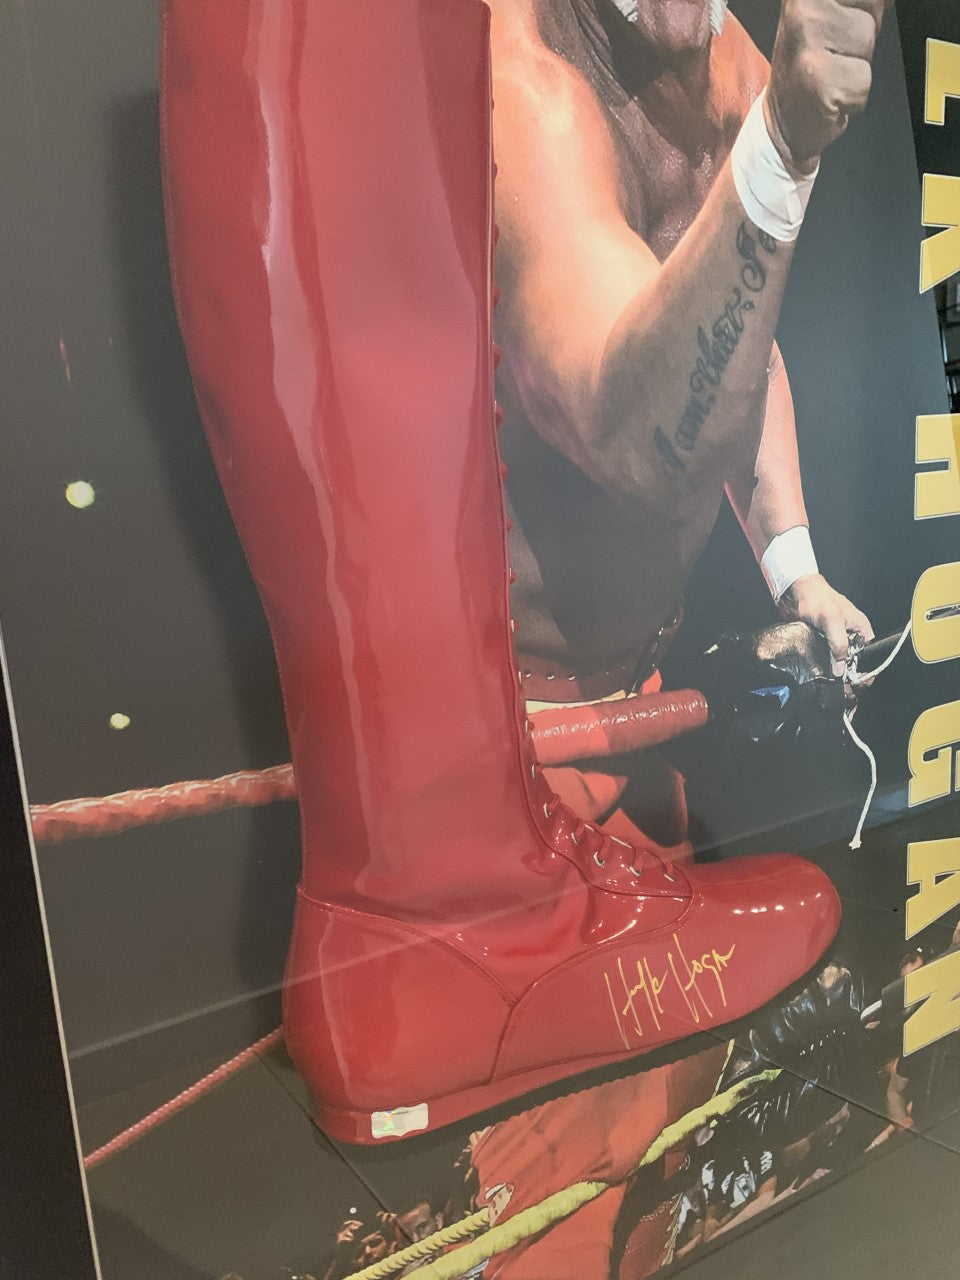 Hulk Hogan WWE Wrestling 12x World Champion signed autographed Red boot Framed with COA